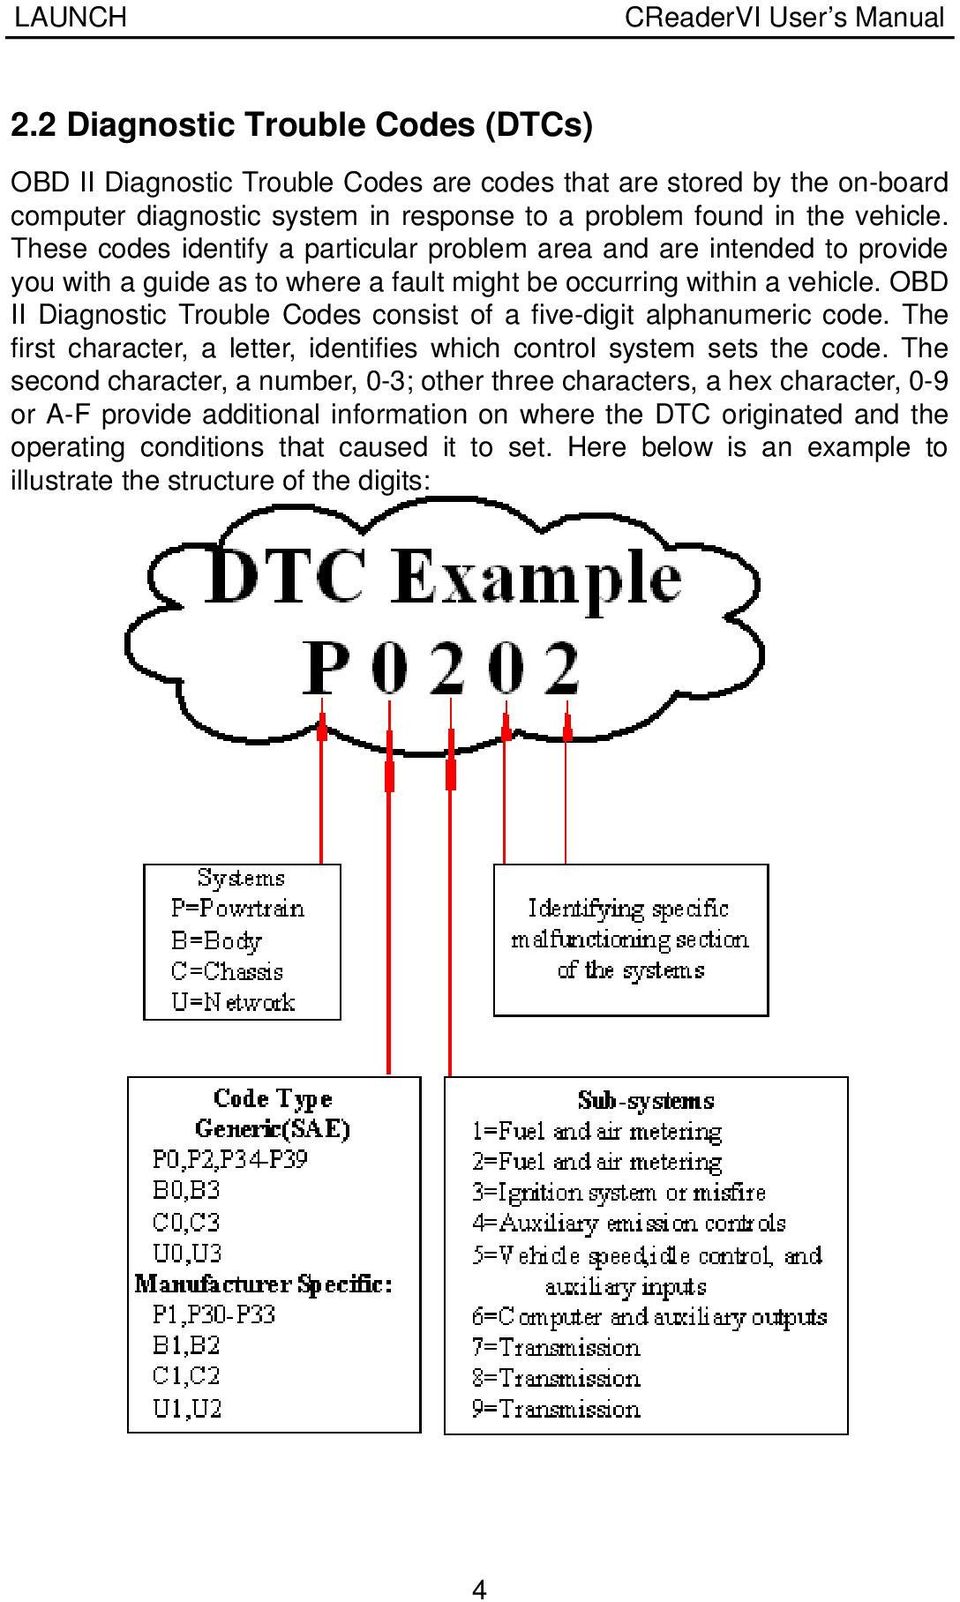 OBD II Diagnostic Trouble Codes consist of a five-digit alphanumeric code. The first character, a letter, identifies which control system sets the code.